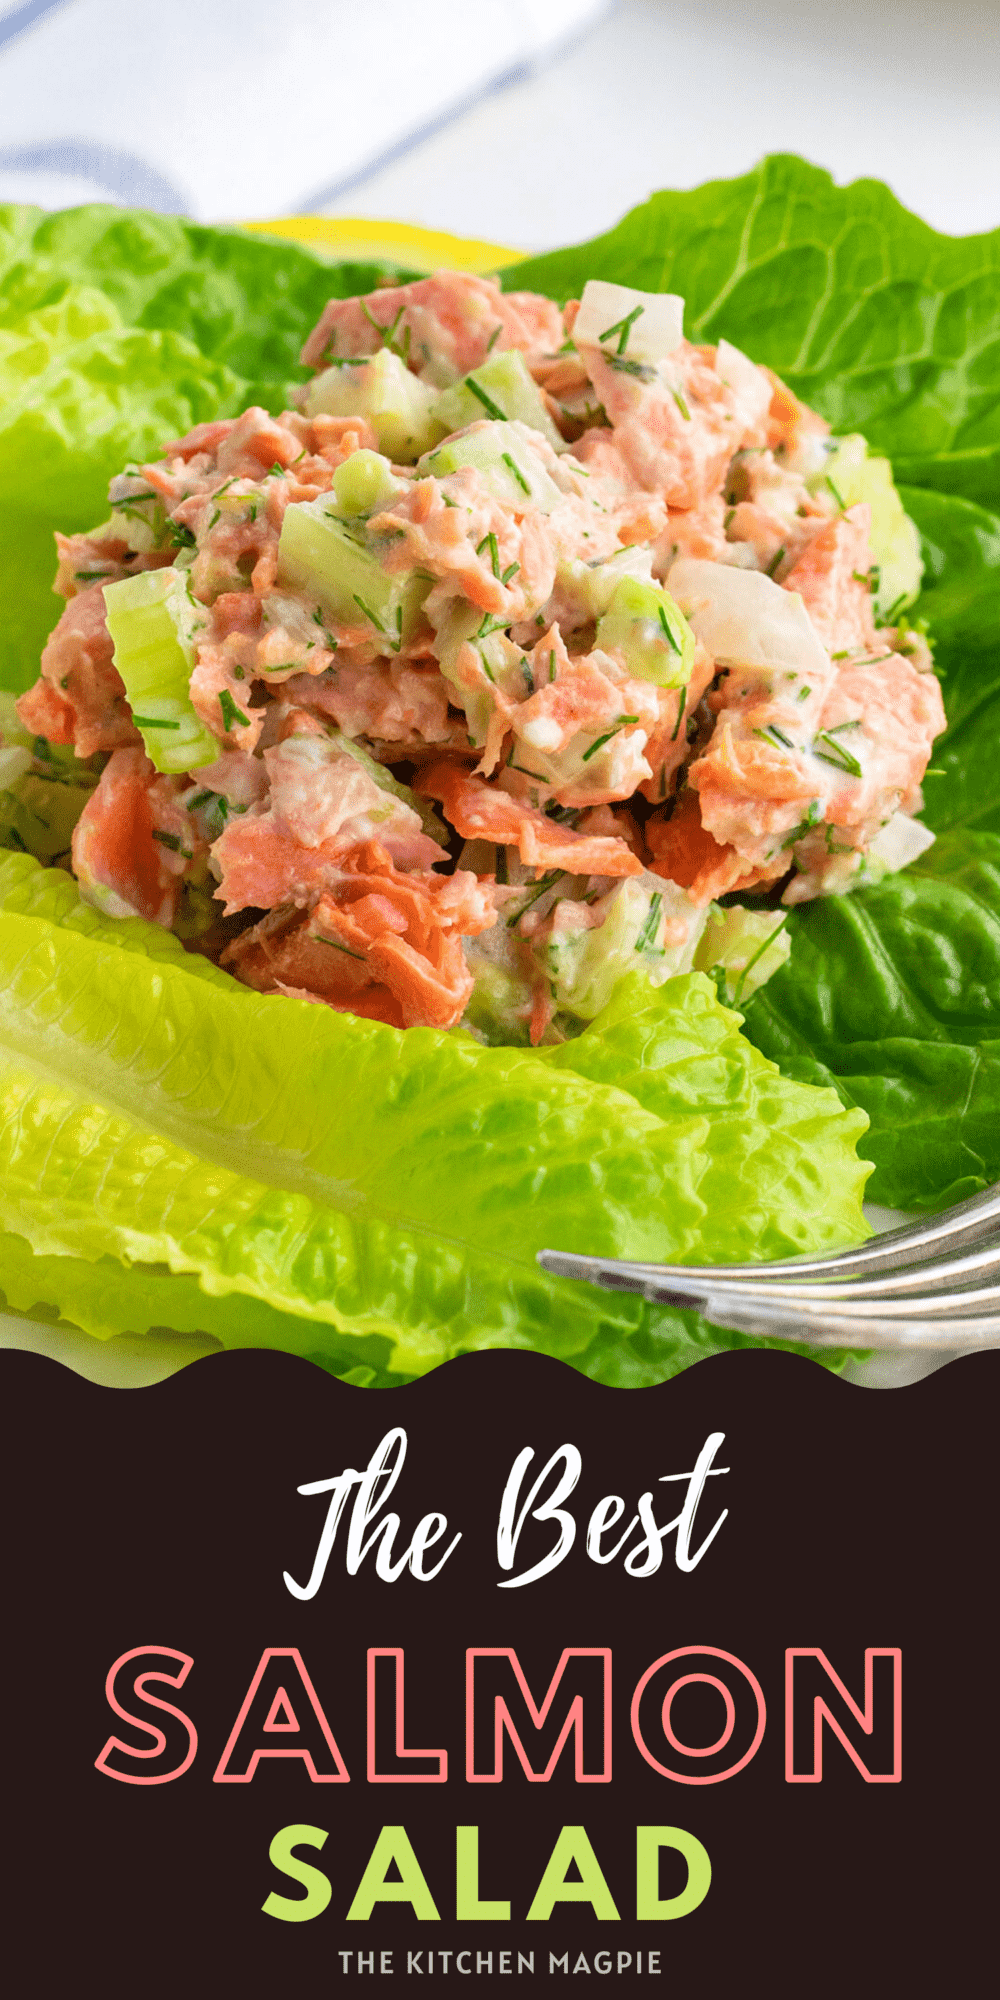 The best salmon salad recipe, loaded with dill celery and avocado. This makes enough for four people to have as a meal.